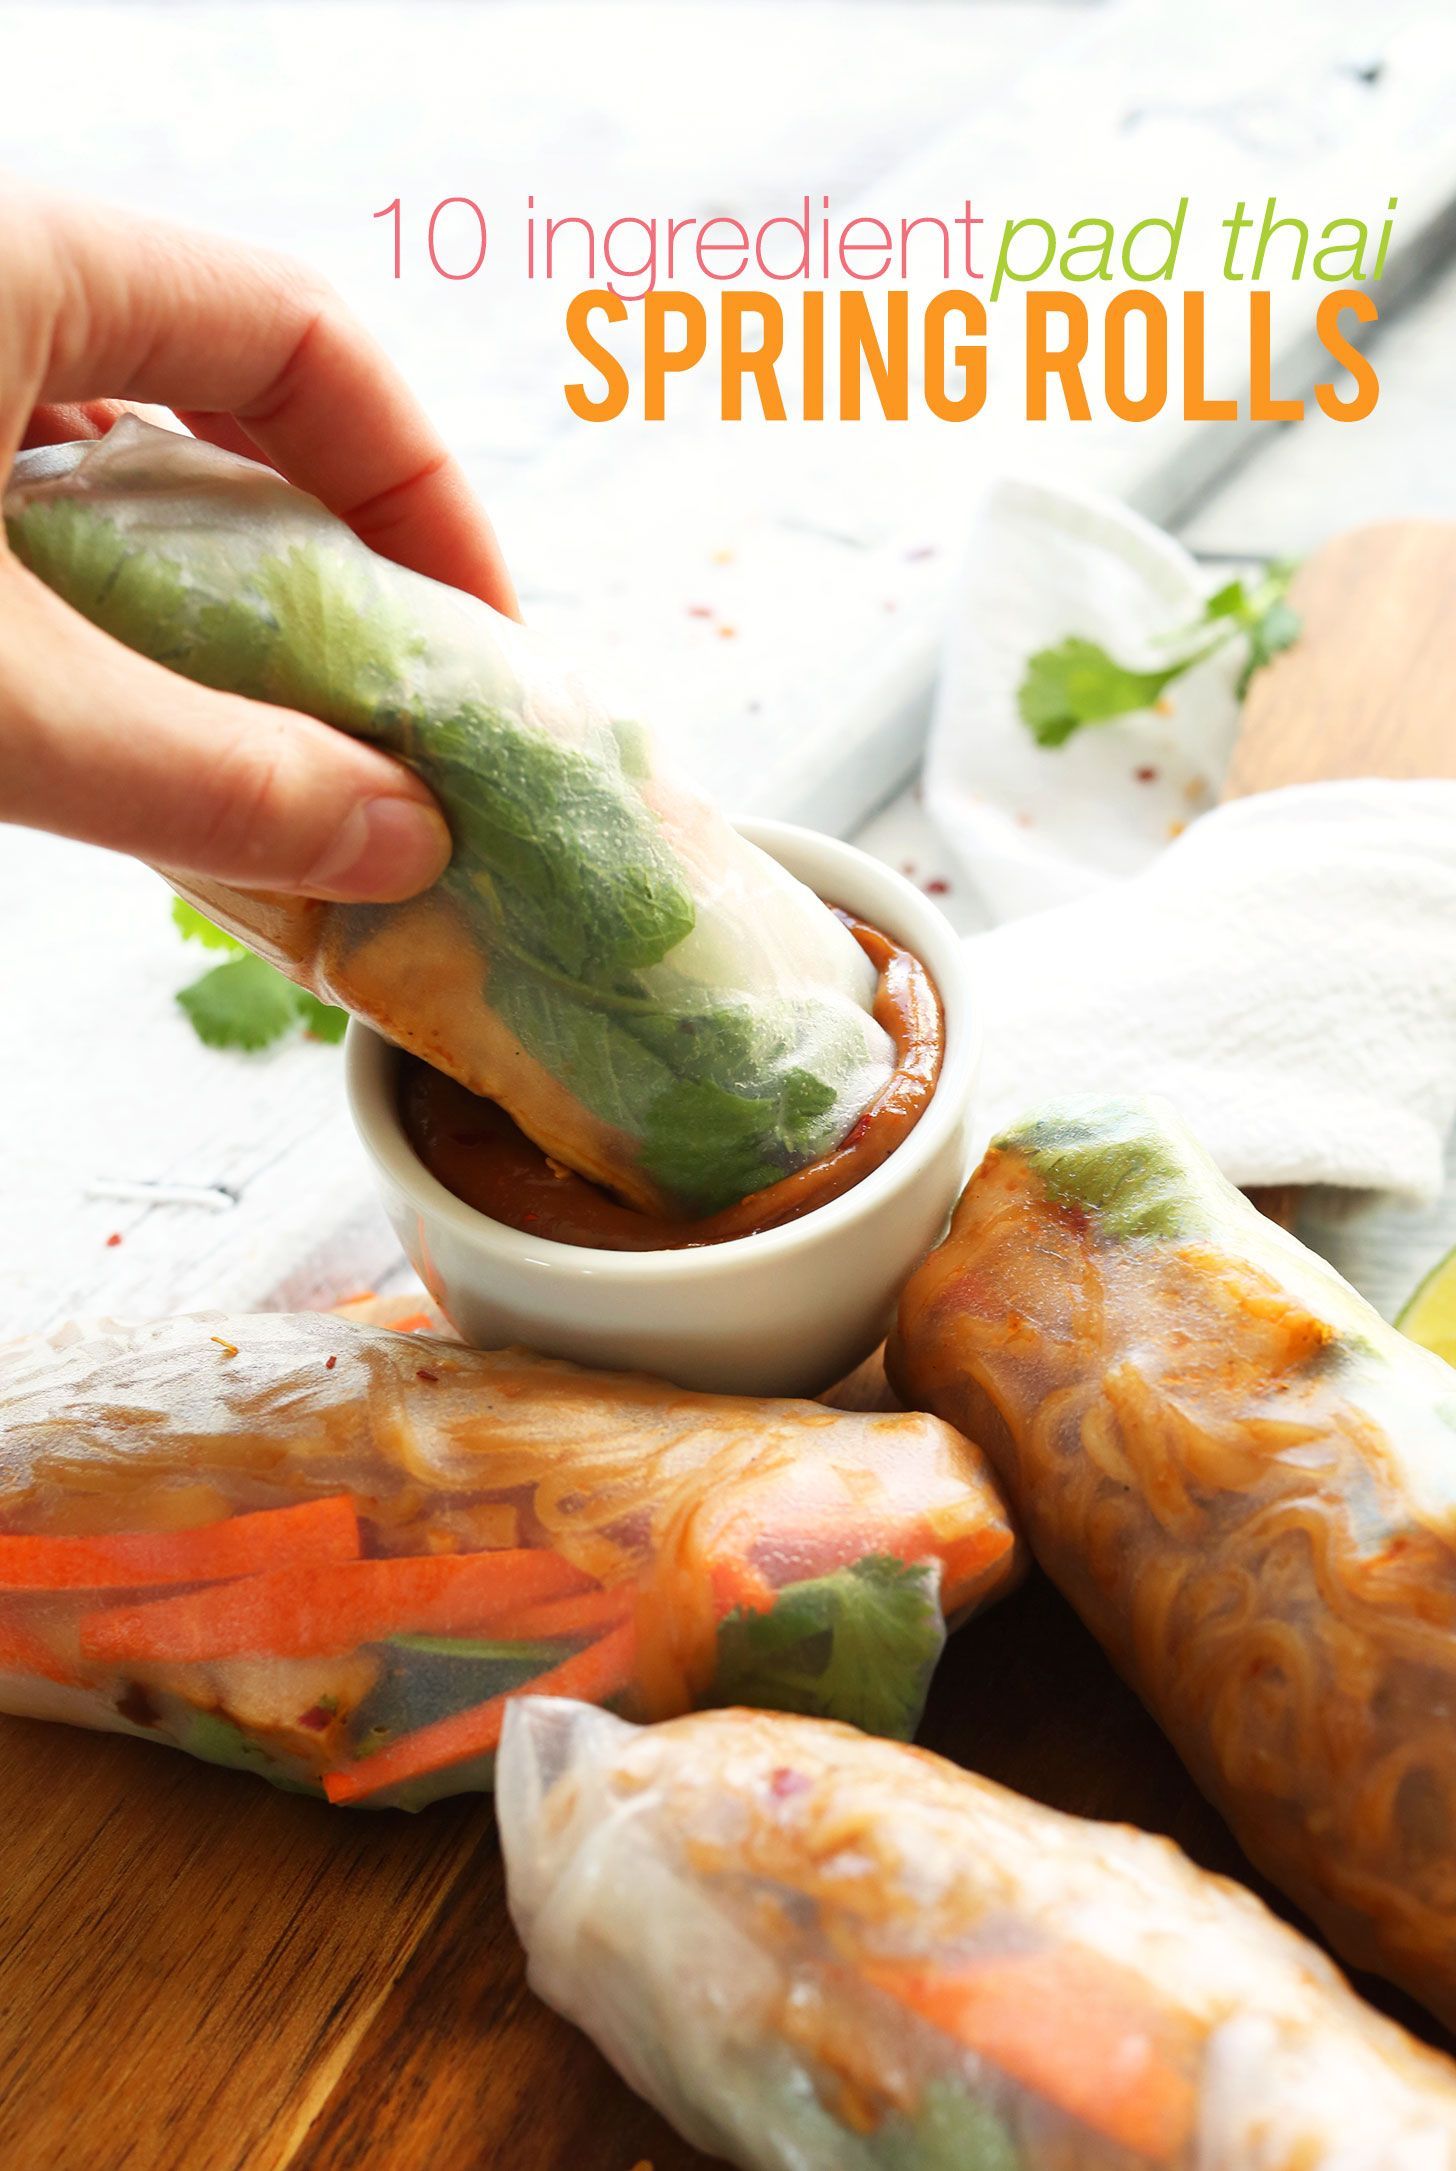 Pad Thai Spring Rolls | Minimalist Baker Recipes. 10 ingredients seems excessive, but Im sure a s